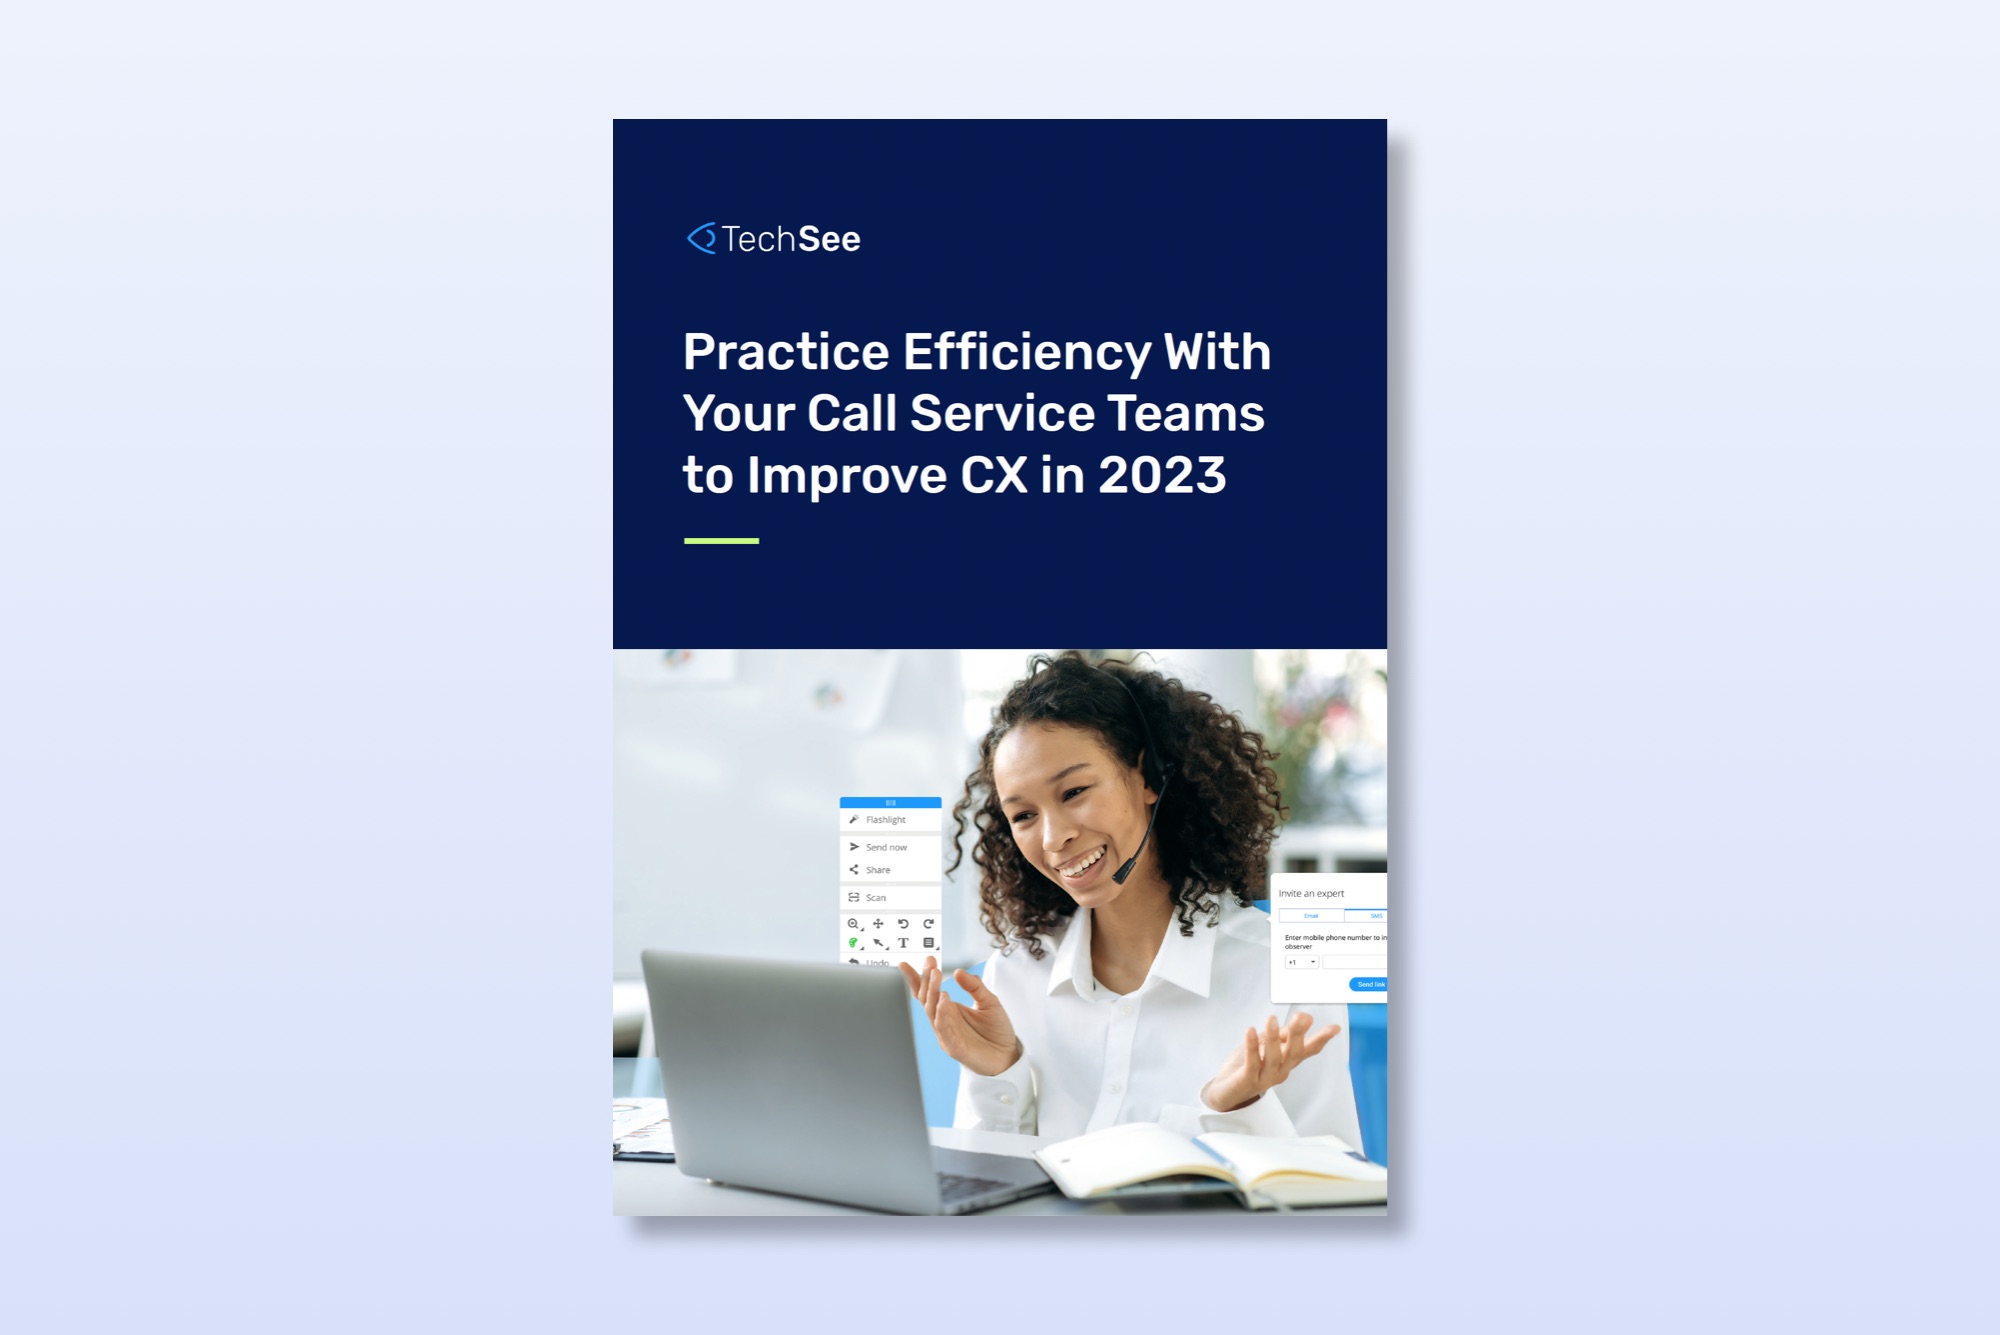 Practice efficiency with your call service teams to improve CX in 2023